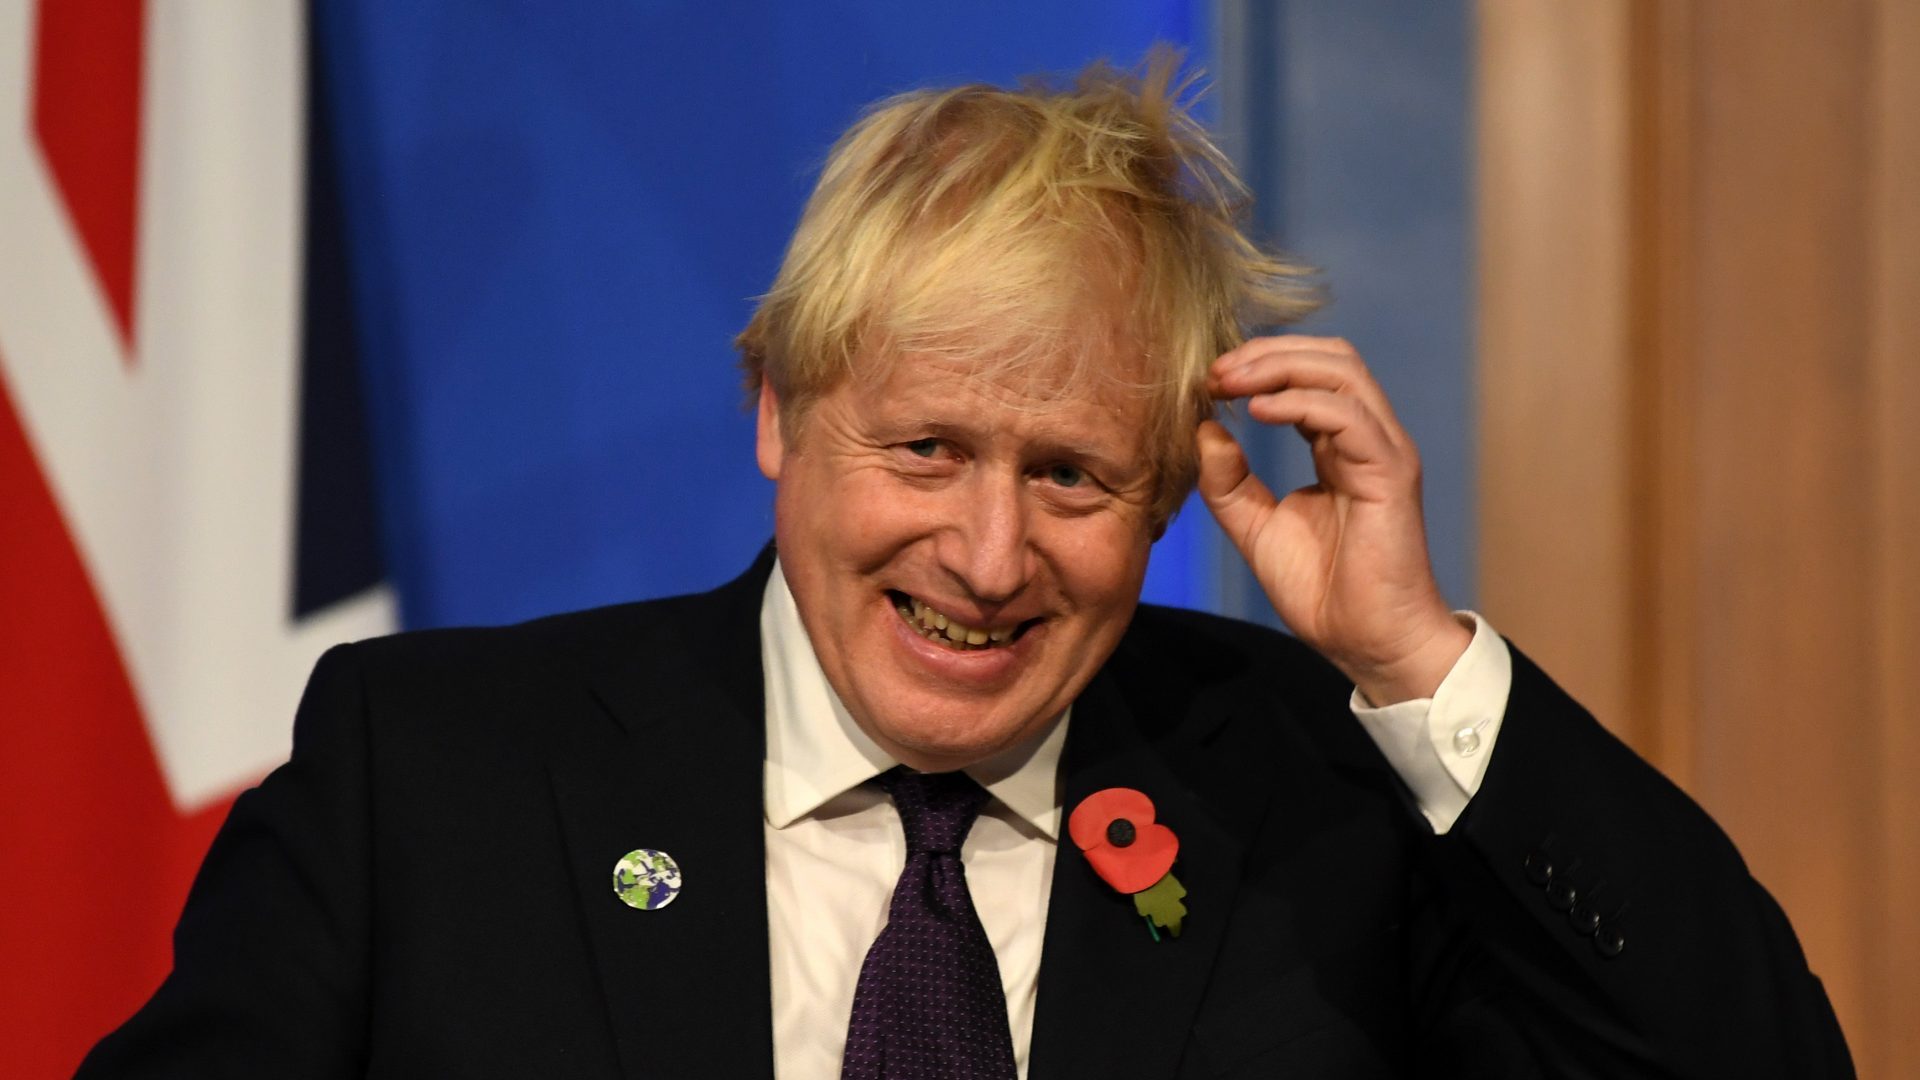 Prime Minister Boris Johnson during a press conference in Downing Street. Photo: Daniel Leal/PA Wire/PA Images.